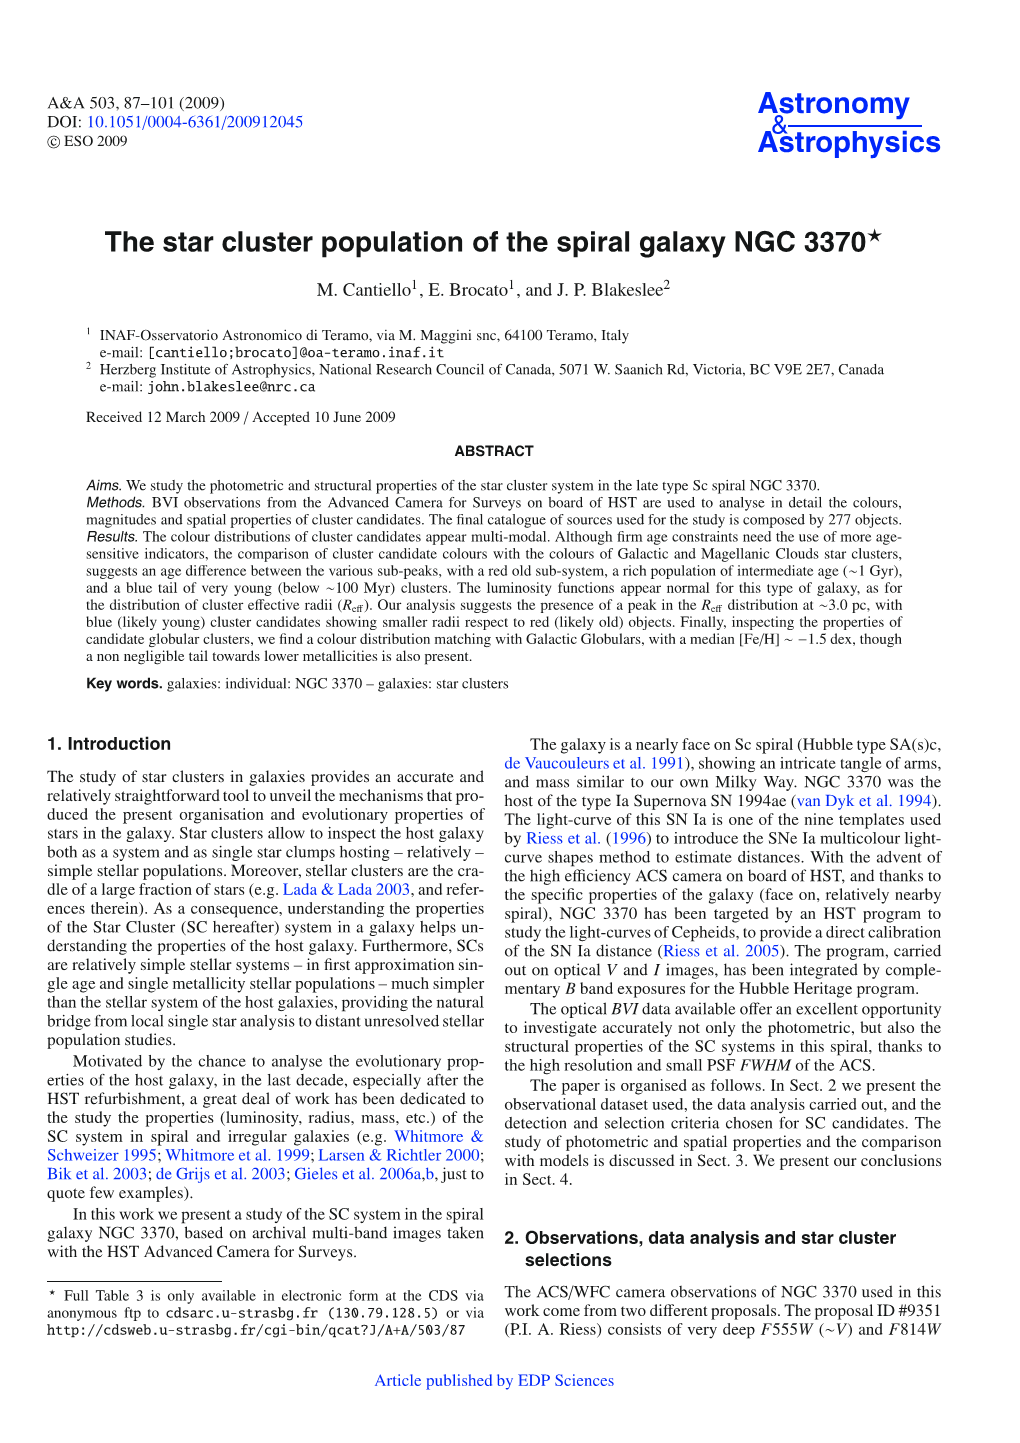 The Star Cluster Population of the Spiral Galaxy NGC 3370